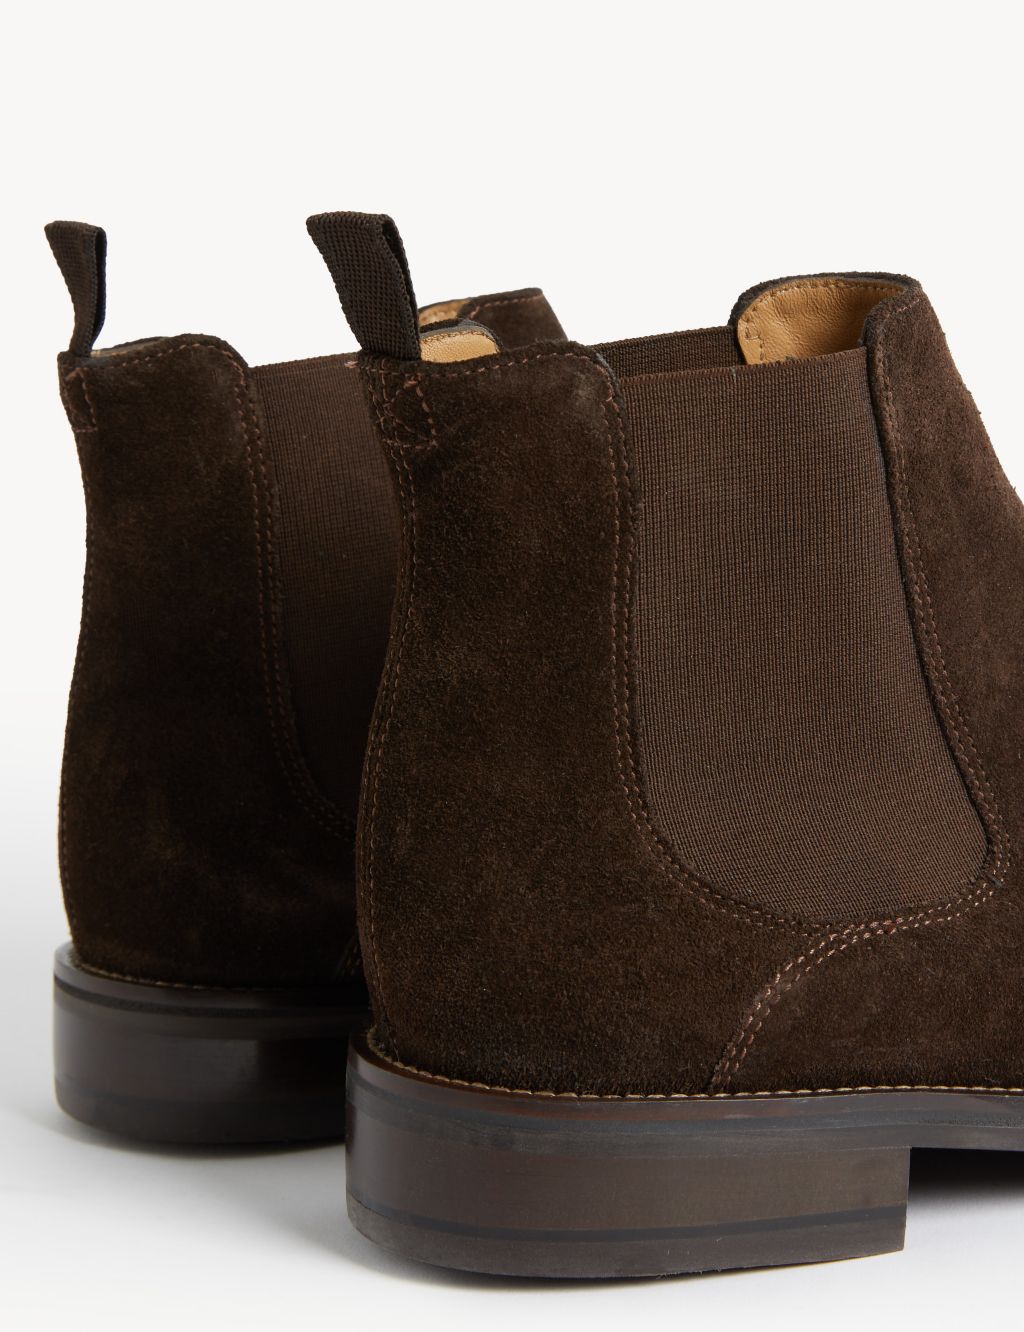 Wide Fit Suede Pull-On Chelsea Boots image 2